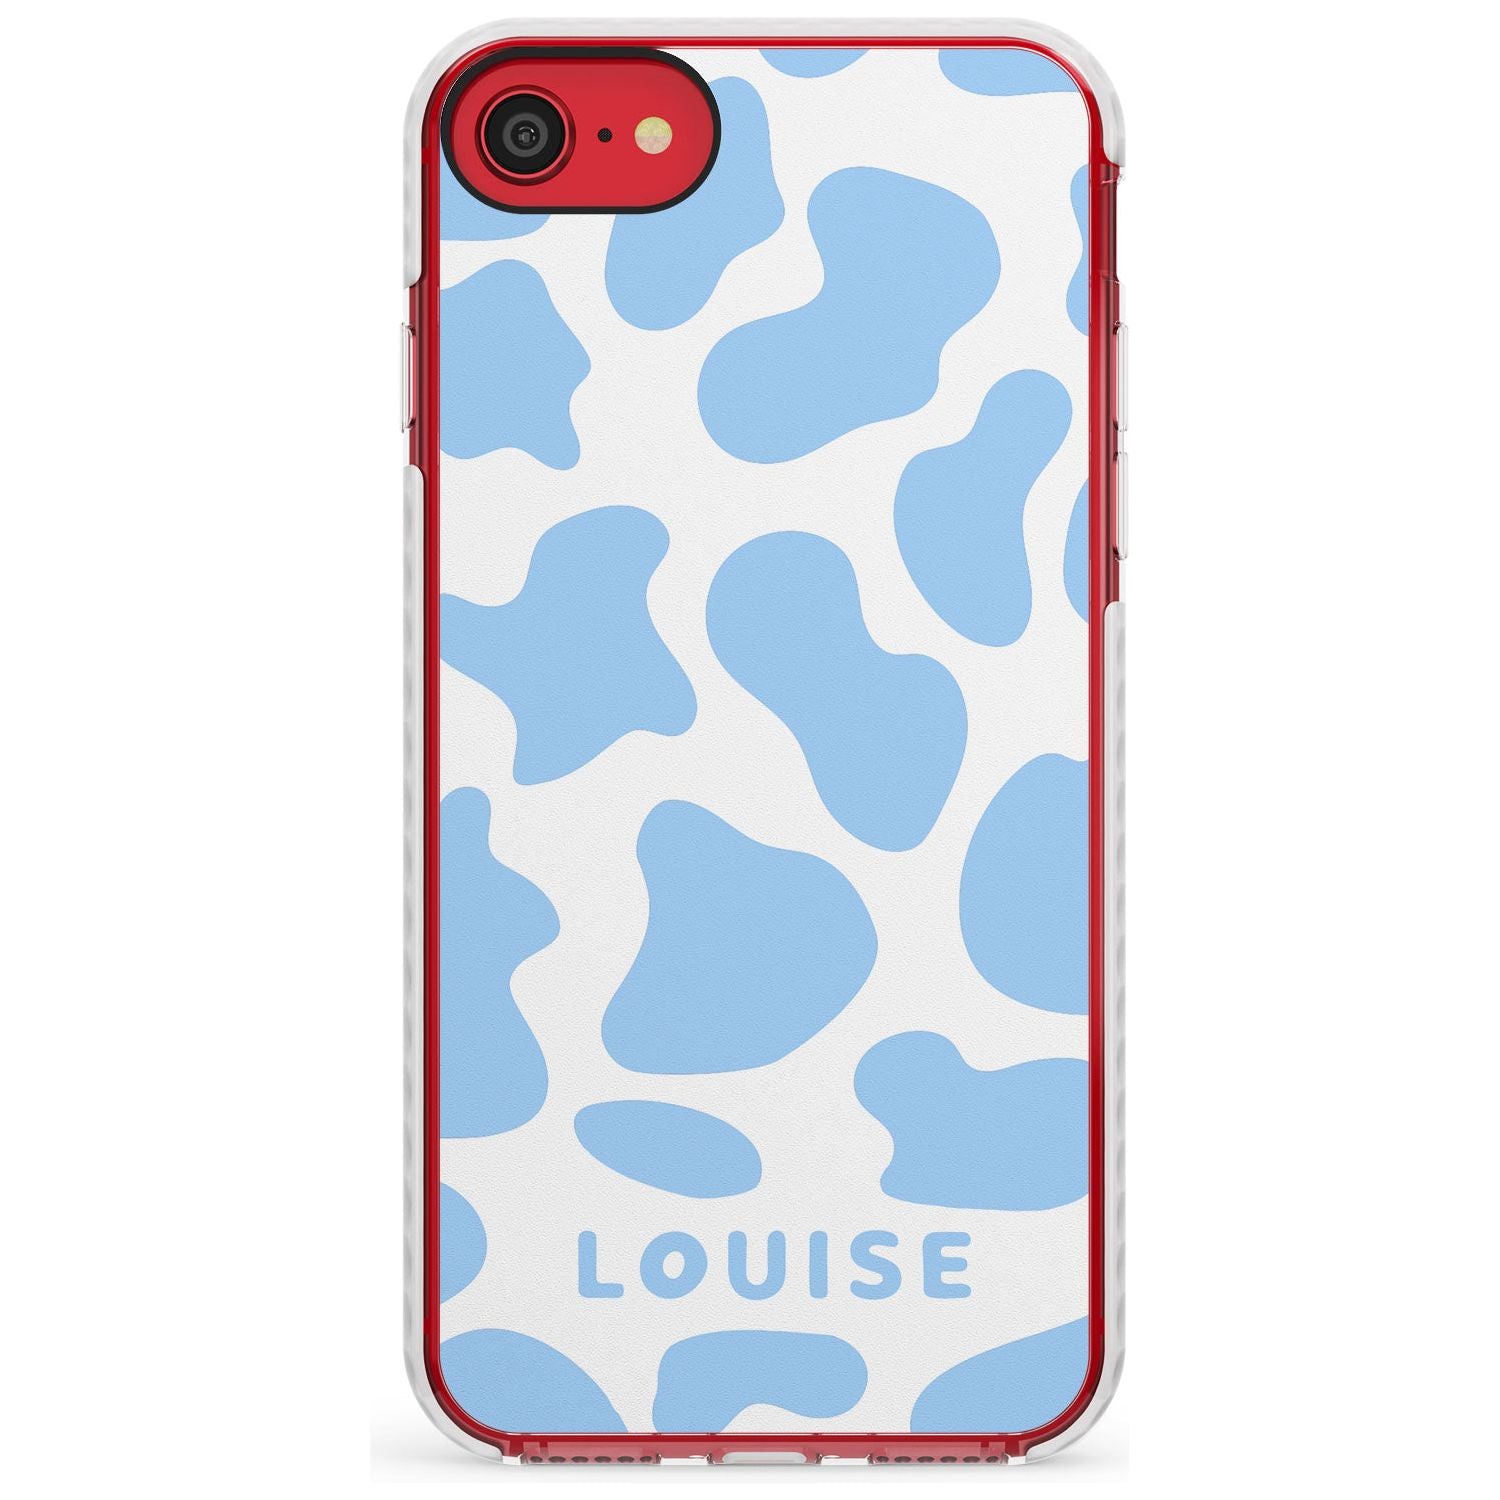 Personalised Blue and White Cow Print Impact Phone Case for iPhone SE 8 7 Plus